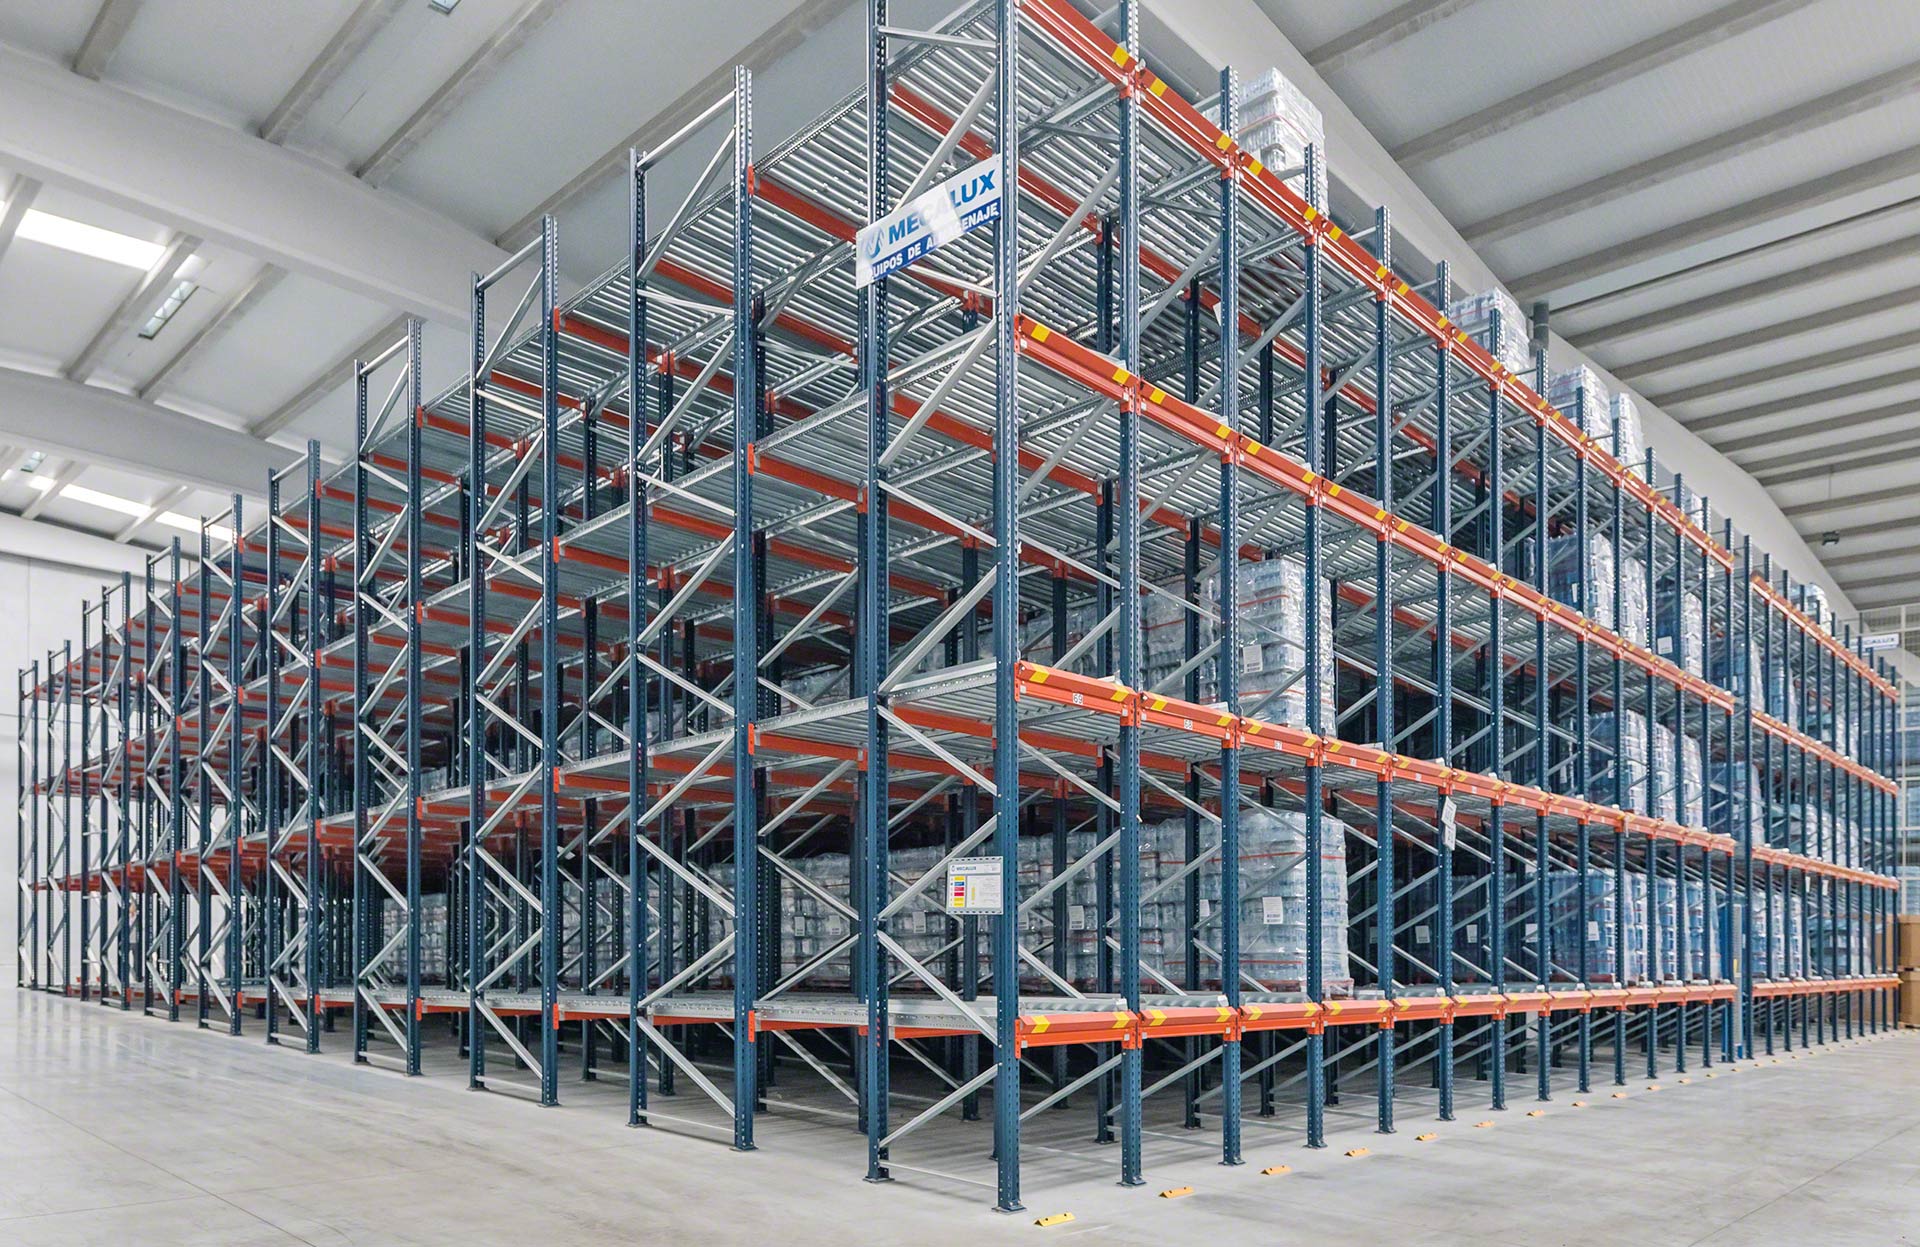 Pallet flow racking is a high-density storage system that maximises space utilisation